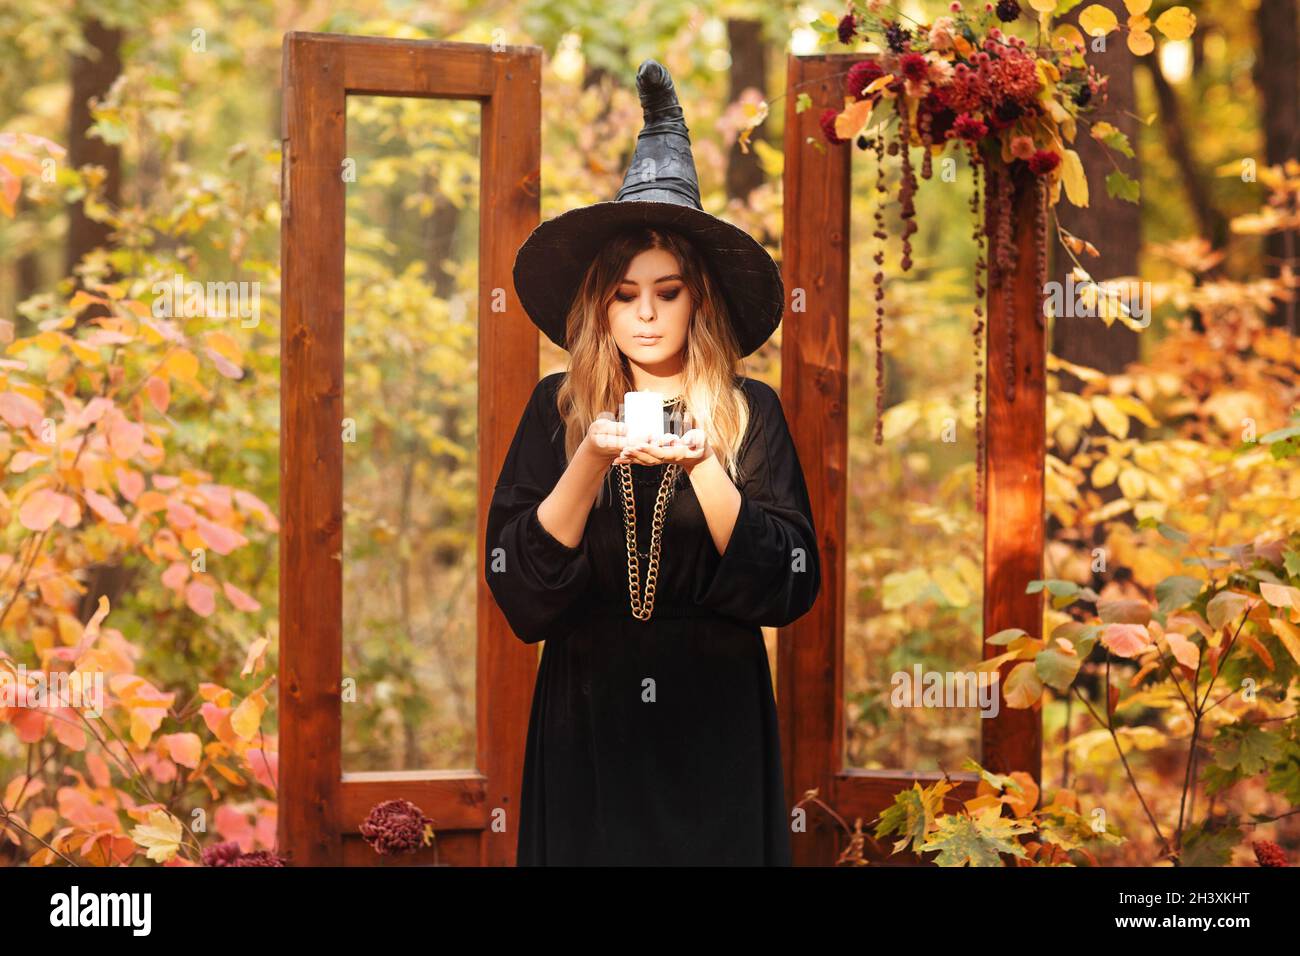 Young woman in Witch costum and hat with candle in hands stands against autumn forest background Stock Photo